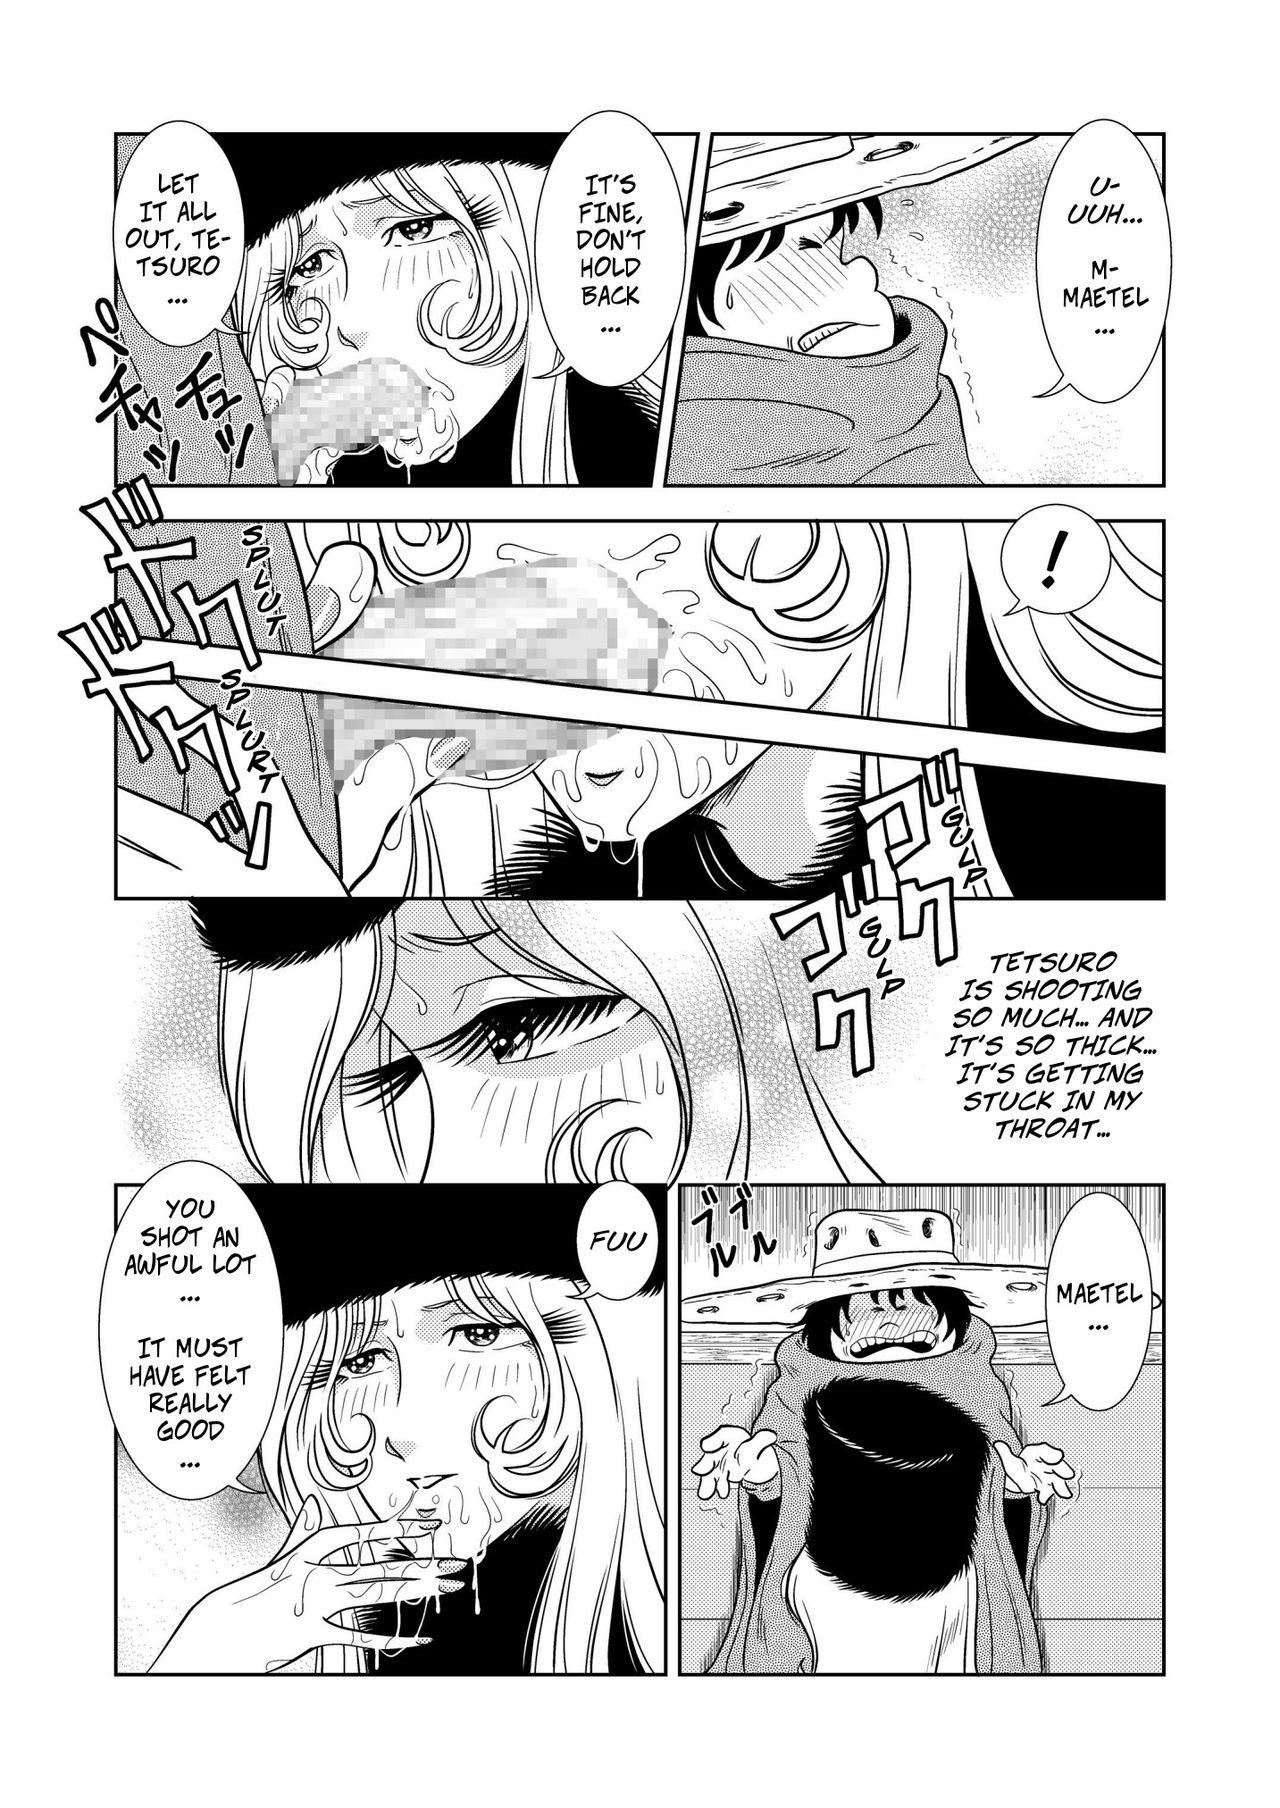 Monster Cock Maetel Story 2 - Galaxy express 999 Wife - Page 10